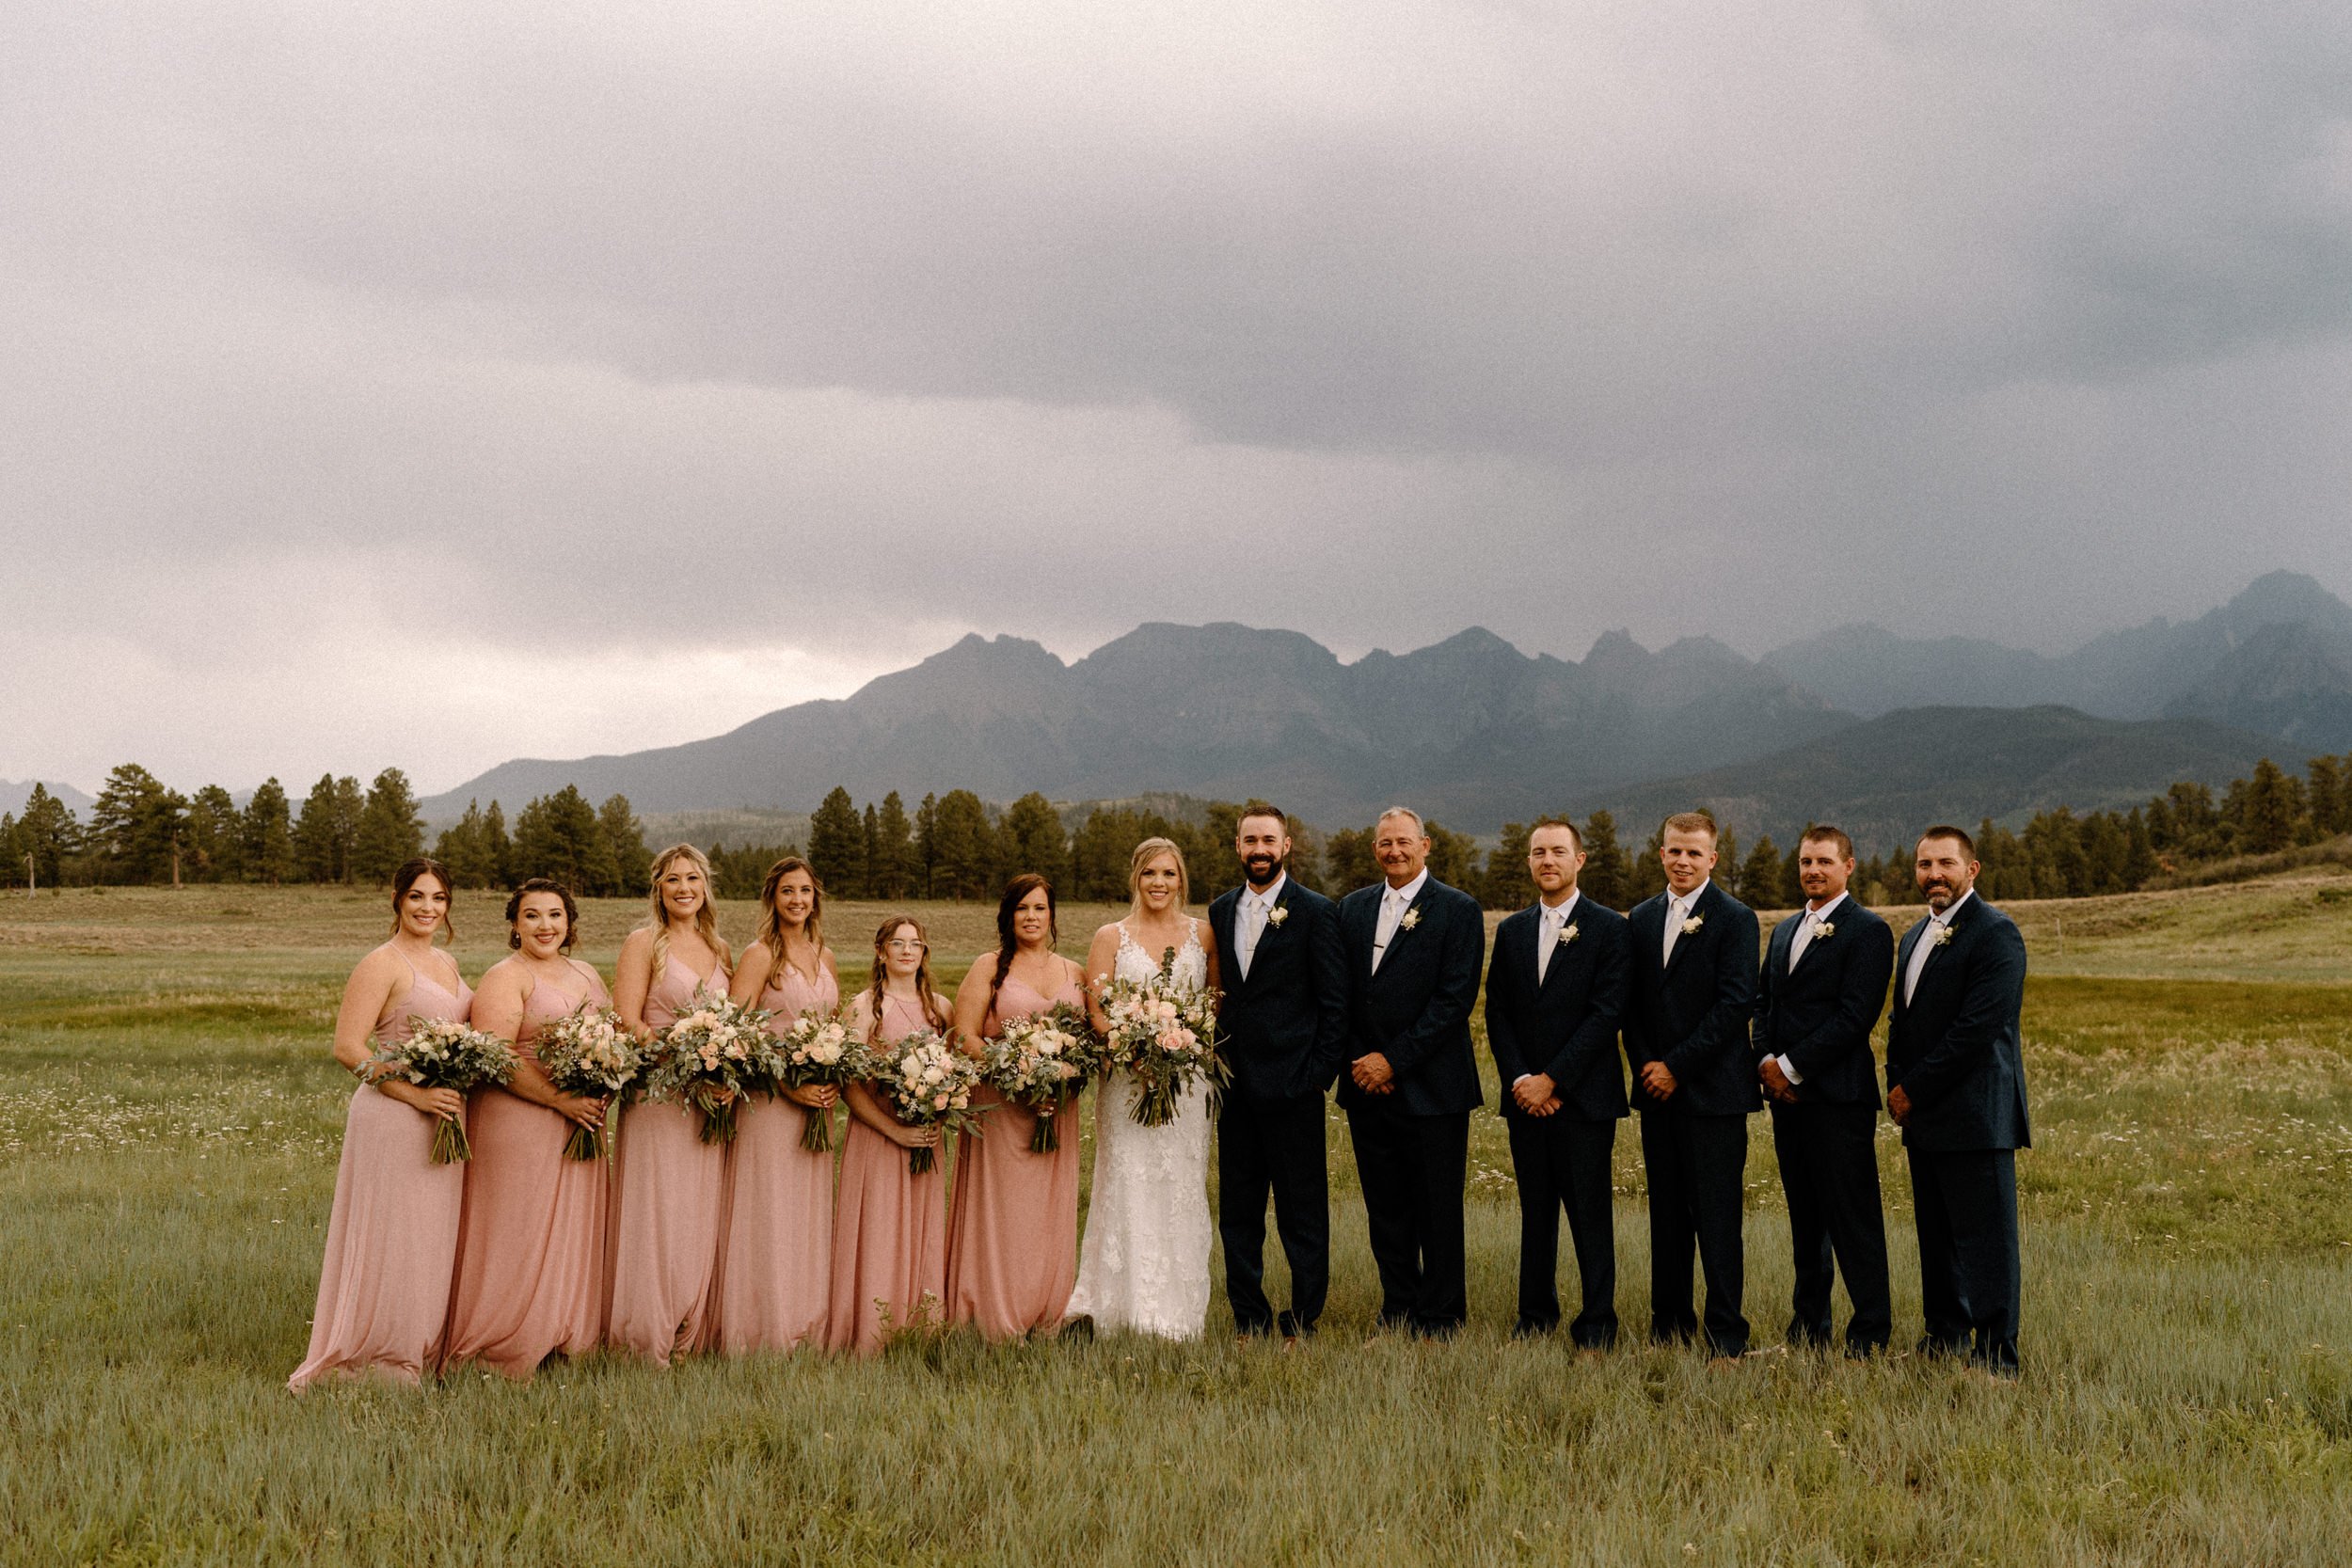 The wedding party poses with the bride and groom at Top of the Pines in Ridgway, CO